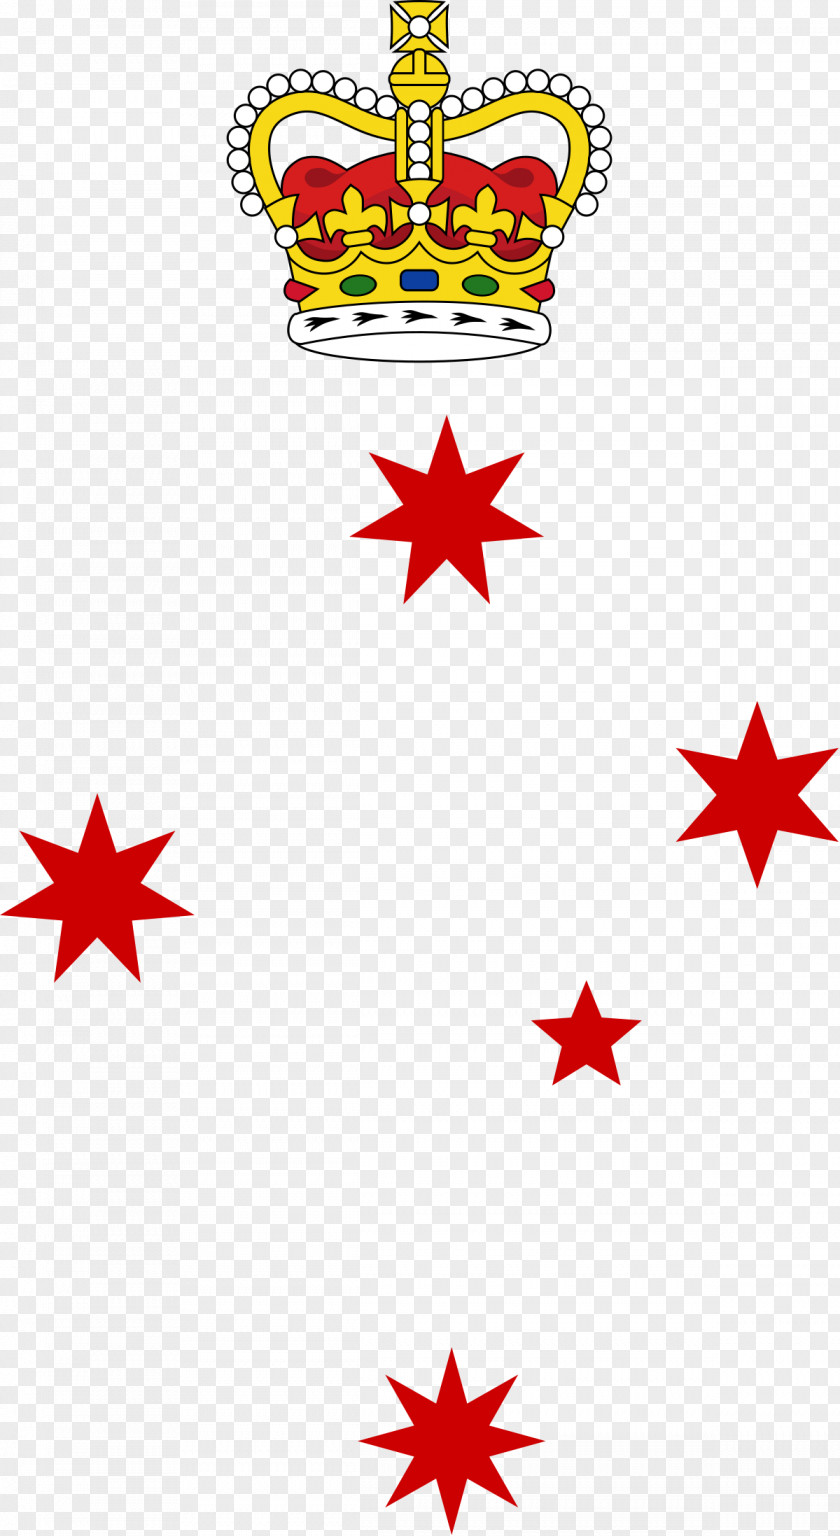 Flag Flags Depicting The Southern Cross Crux Of Australia Eureka Rebellion PNG